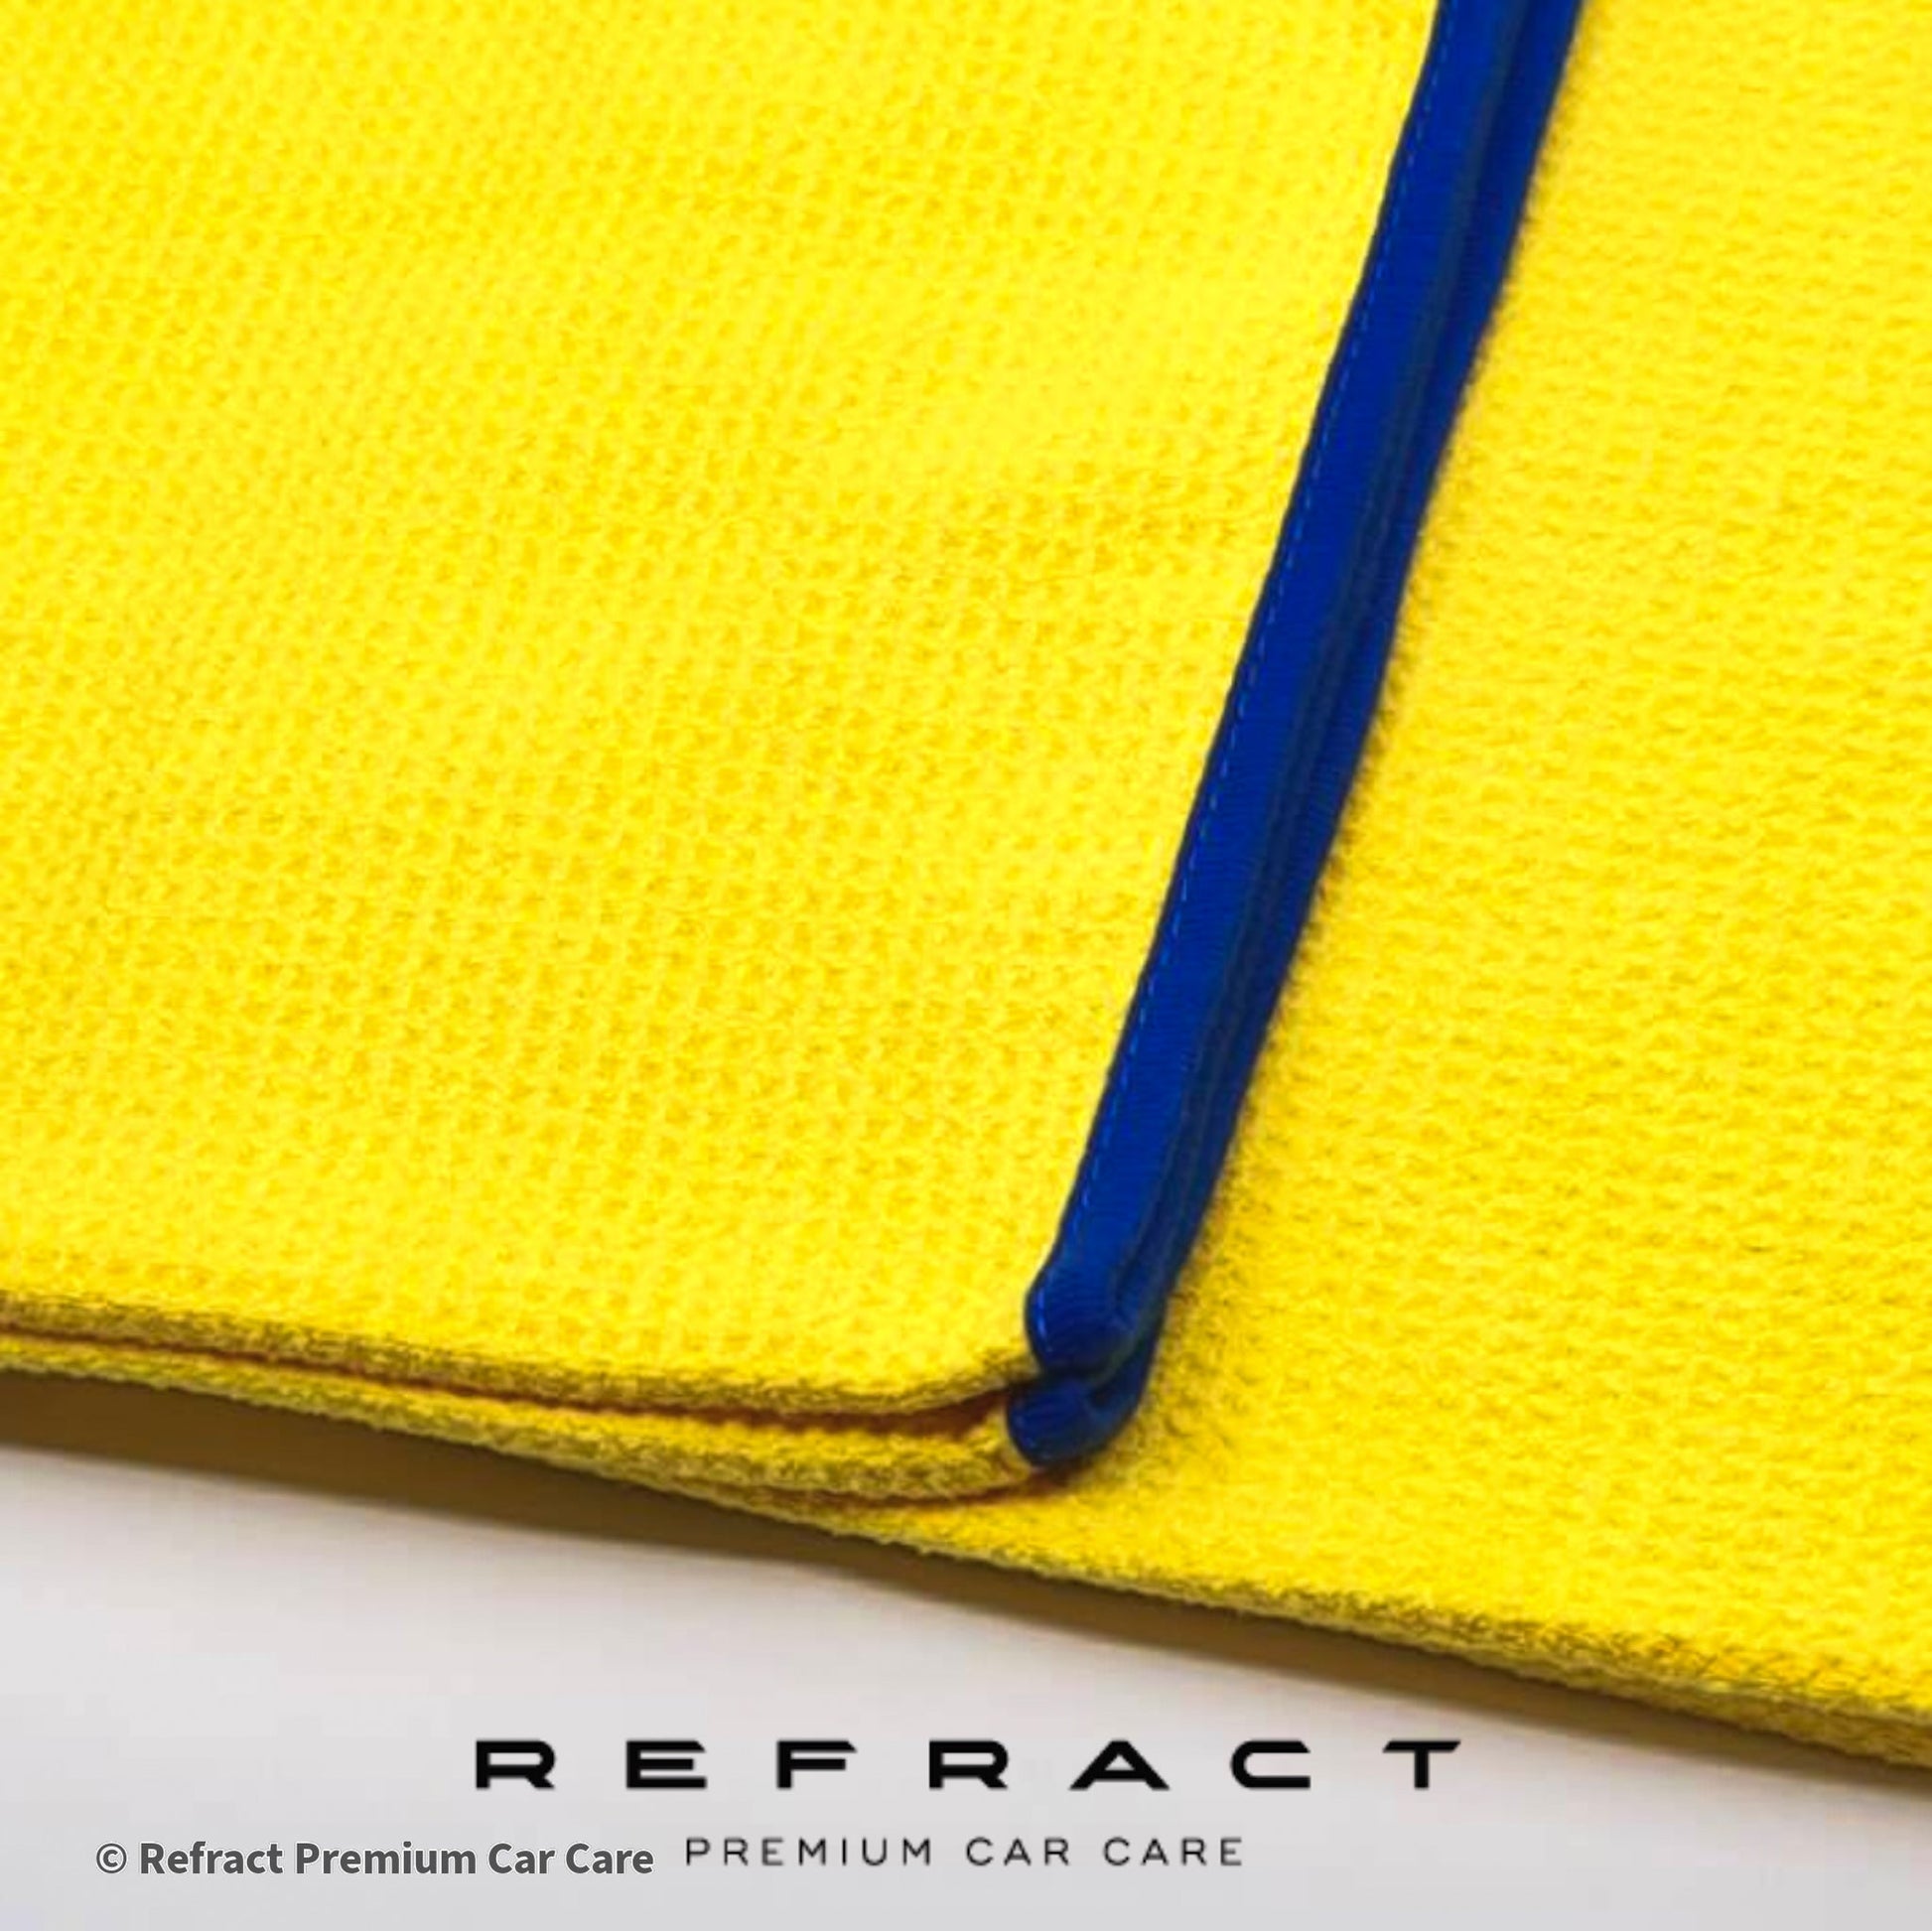 Refract Premium Car Care Products Refract Pro-Glass Microfiber Waffle Towels  - Twin Pack $12.95